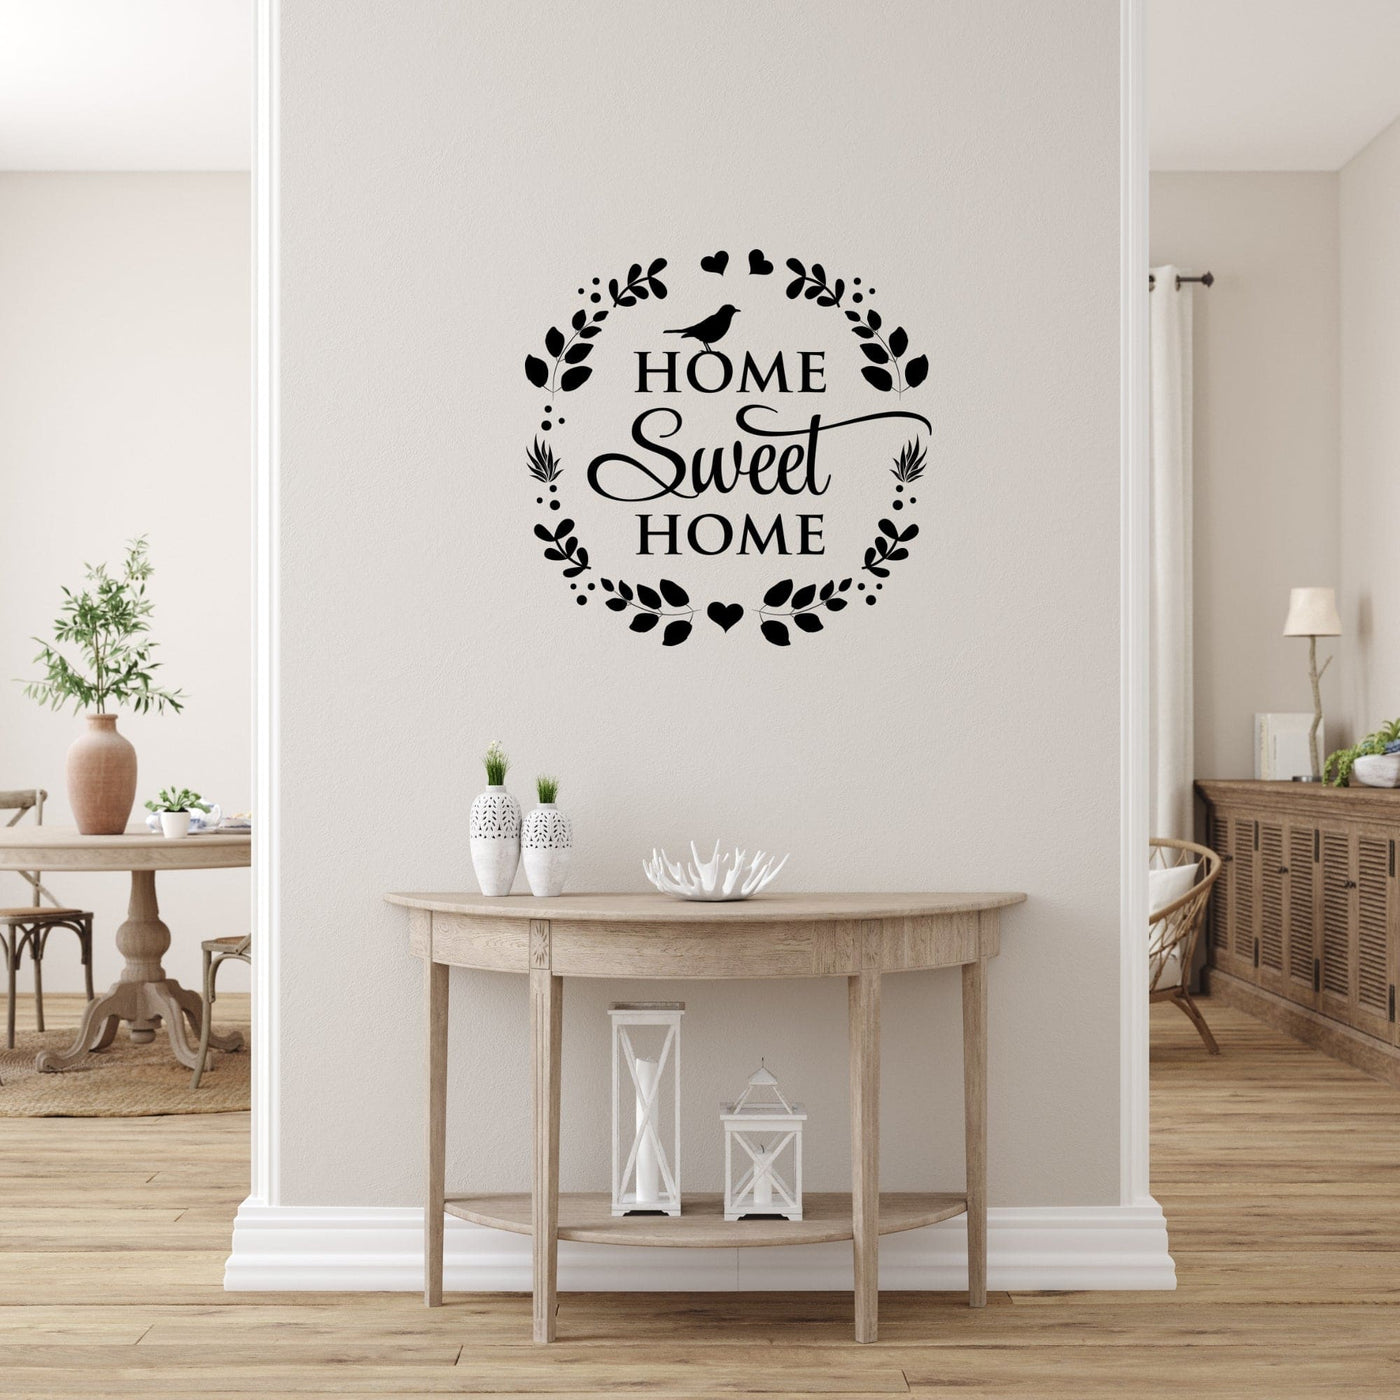 Decor - Home Sweet Home Removable Vinyl Wall Decal Easy Peel And Stick Wall Art